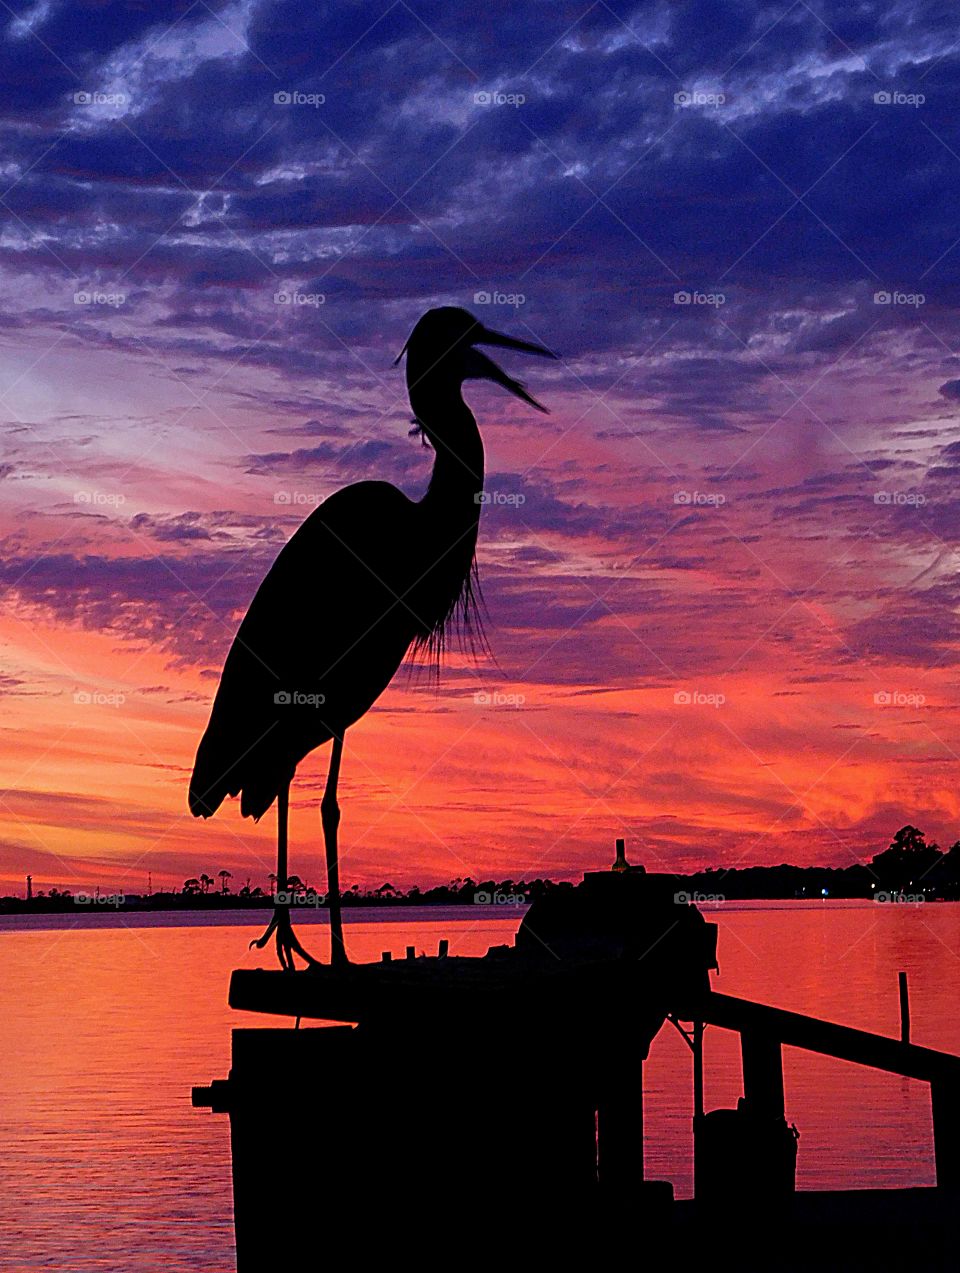 Silhouettes and shadows - A Great Blue Heron squawks at fishermen while standings on the fishing pier